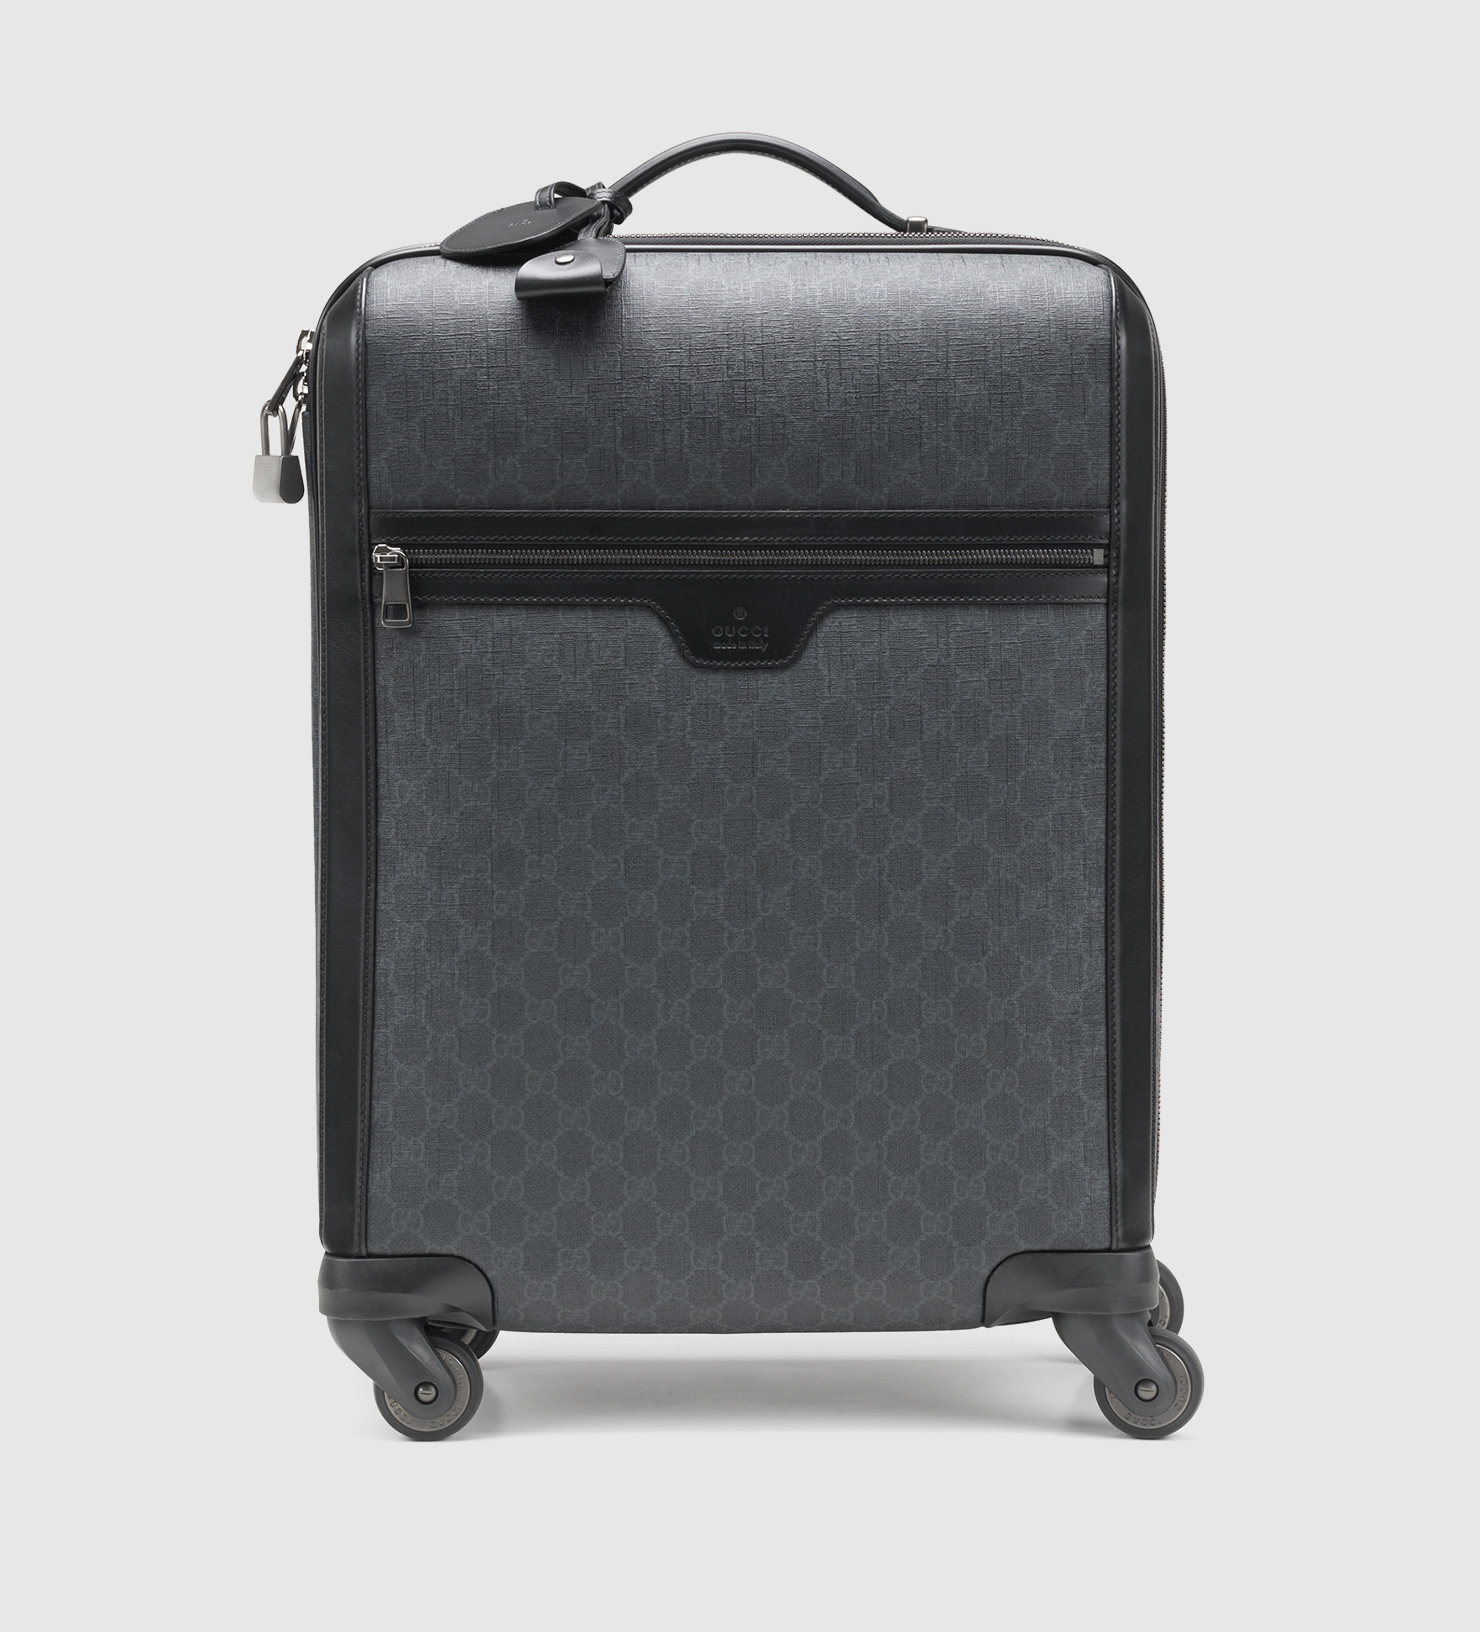 Lyst - Gucci Gg Supreme Canvas Wheeled Carry-on Suitcase in Black for Men